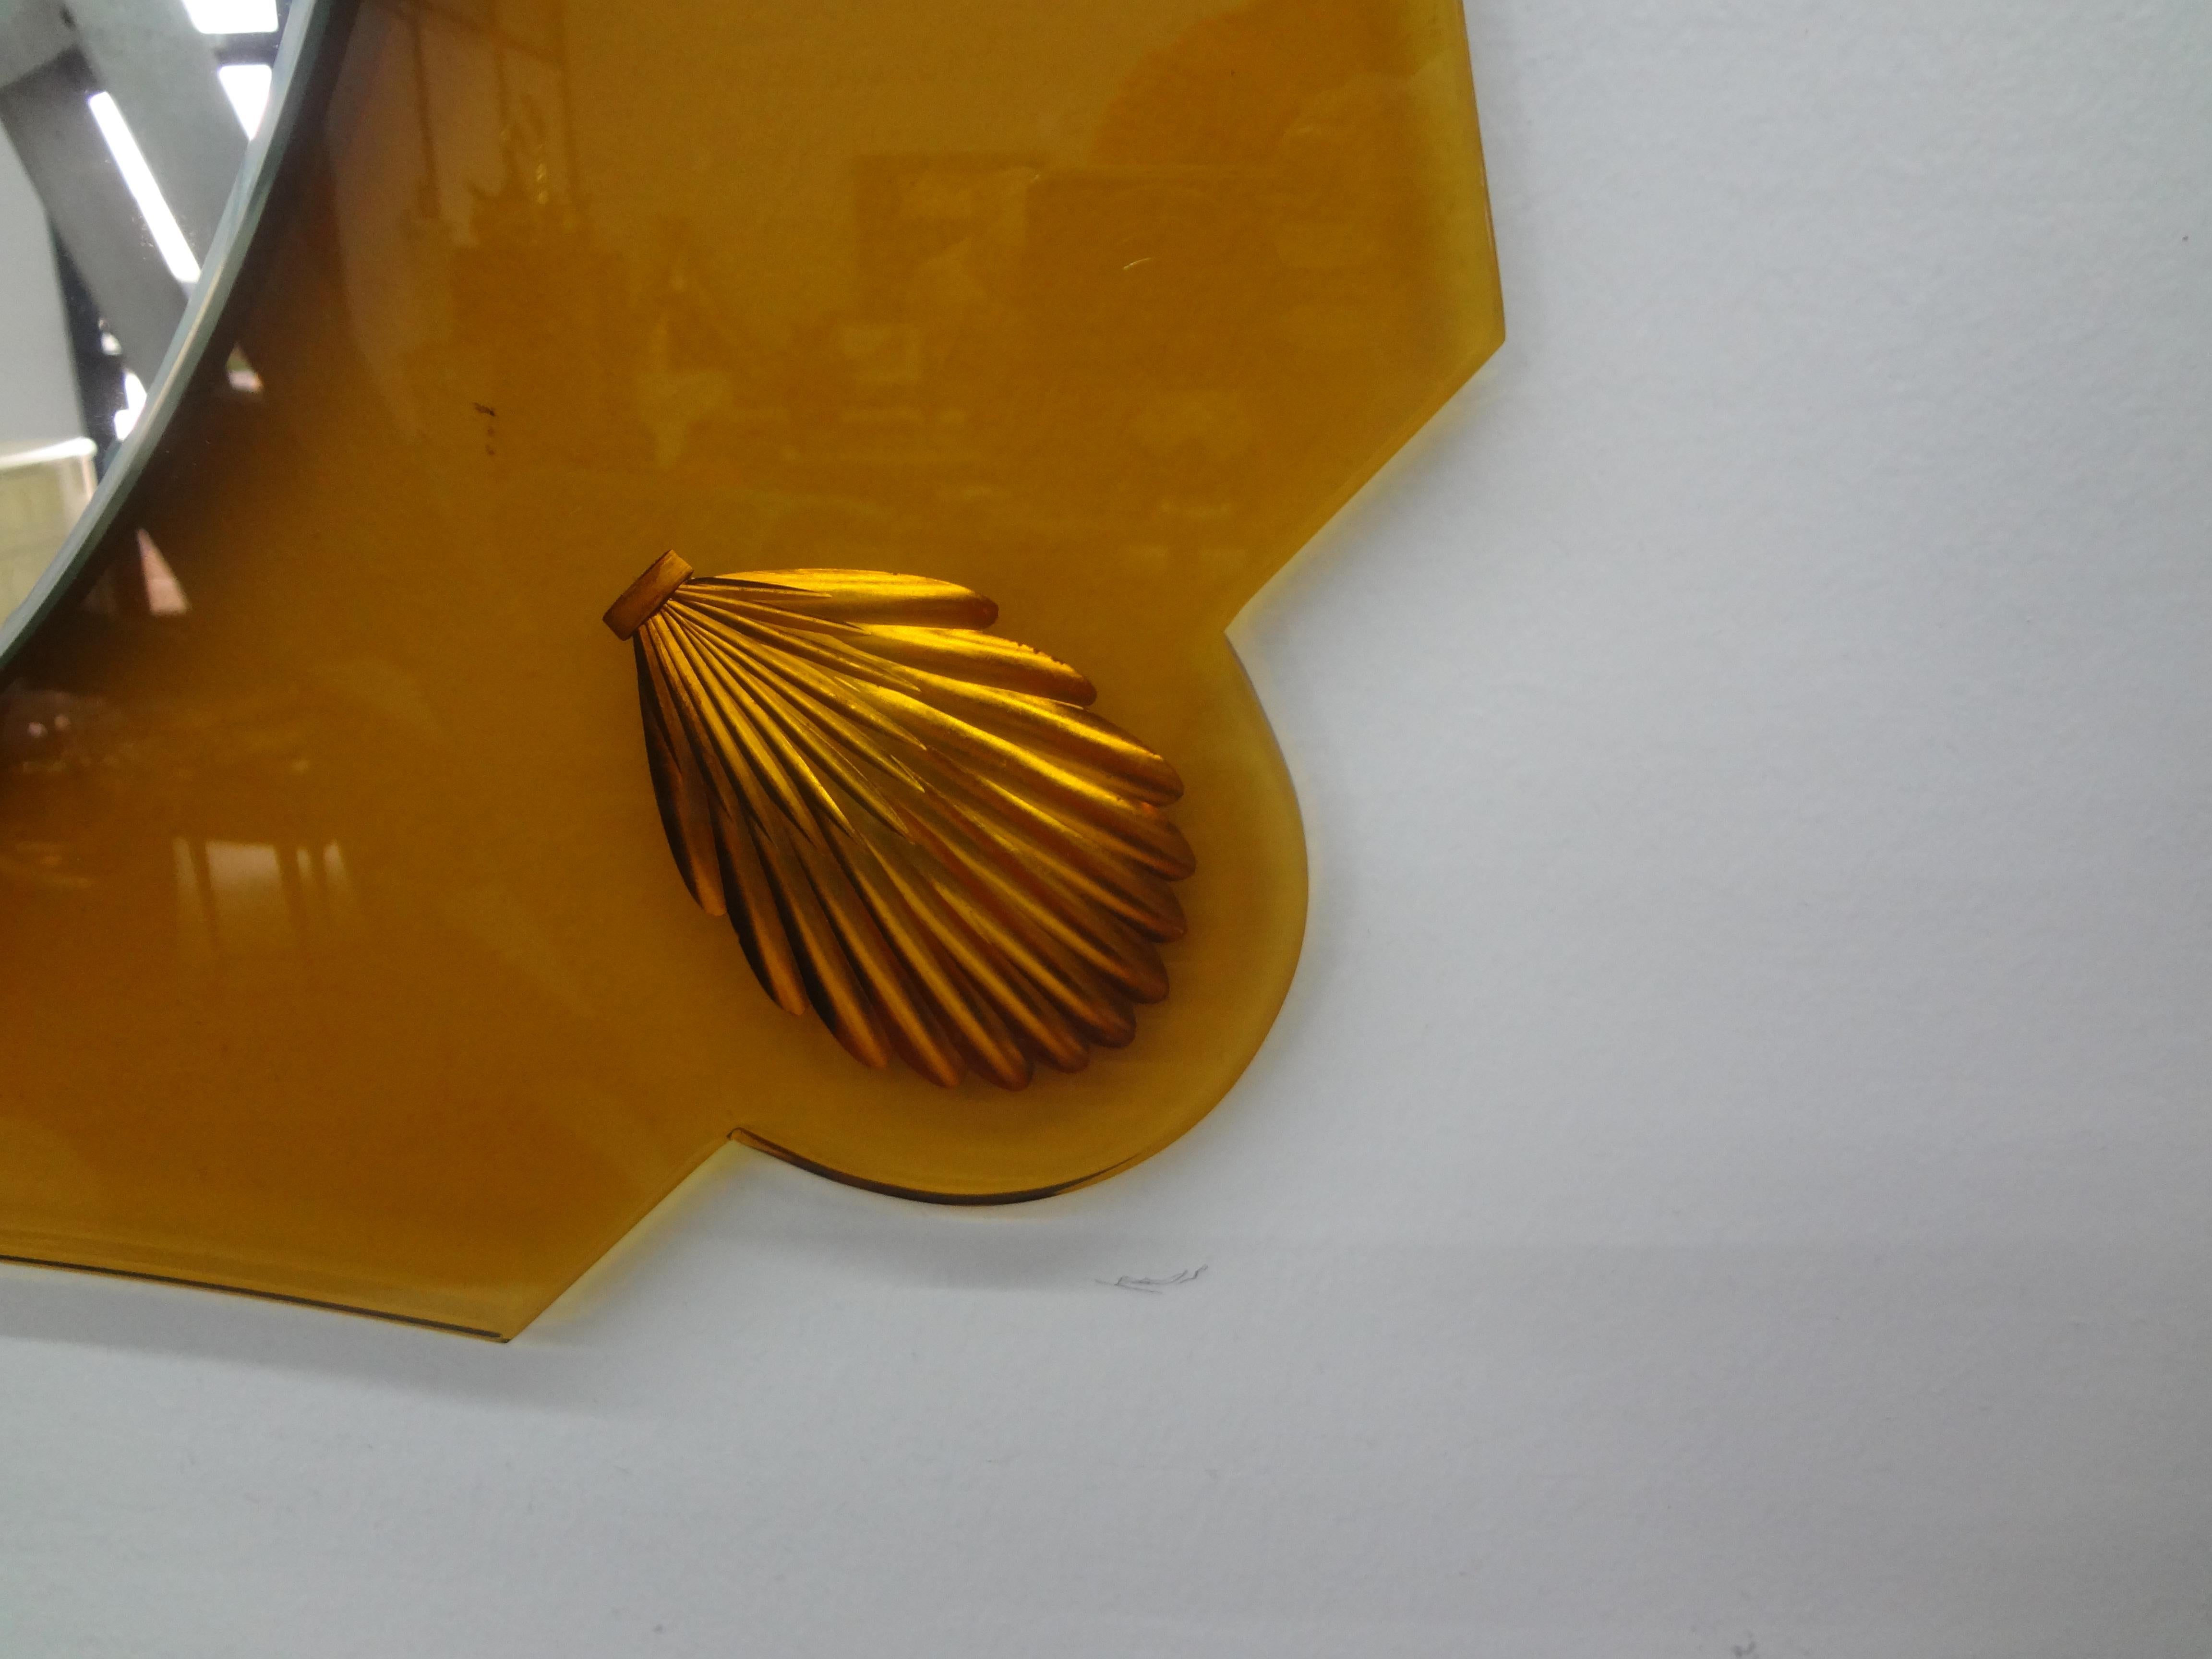 Italian Fontana Arte style golden yellow mirror.
This stunning Italian midcentury Pietro Chiesa inspired mirror is made of an unusually shaped yellow/gold glass with etched gold shells in each corner and an oval central mirror.
Versatile mirror that